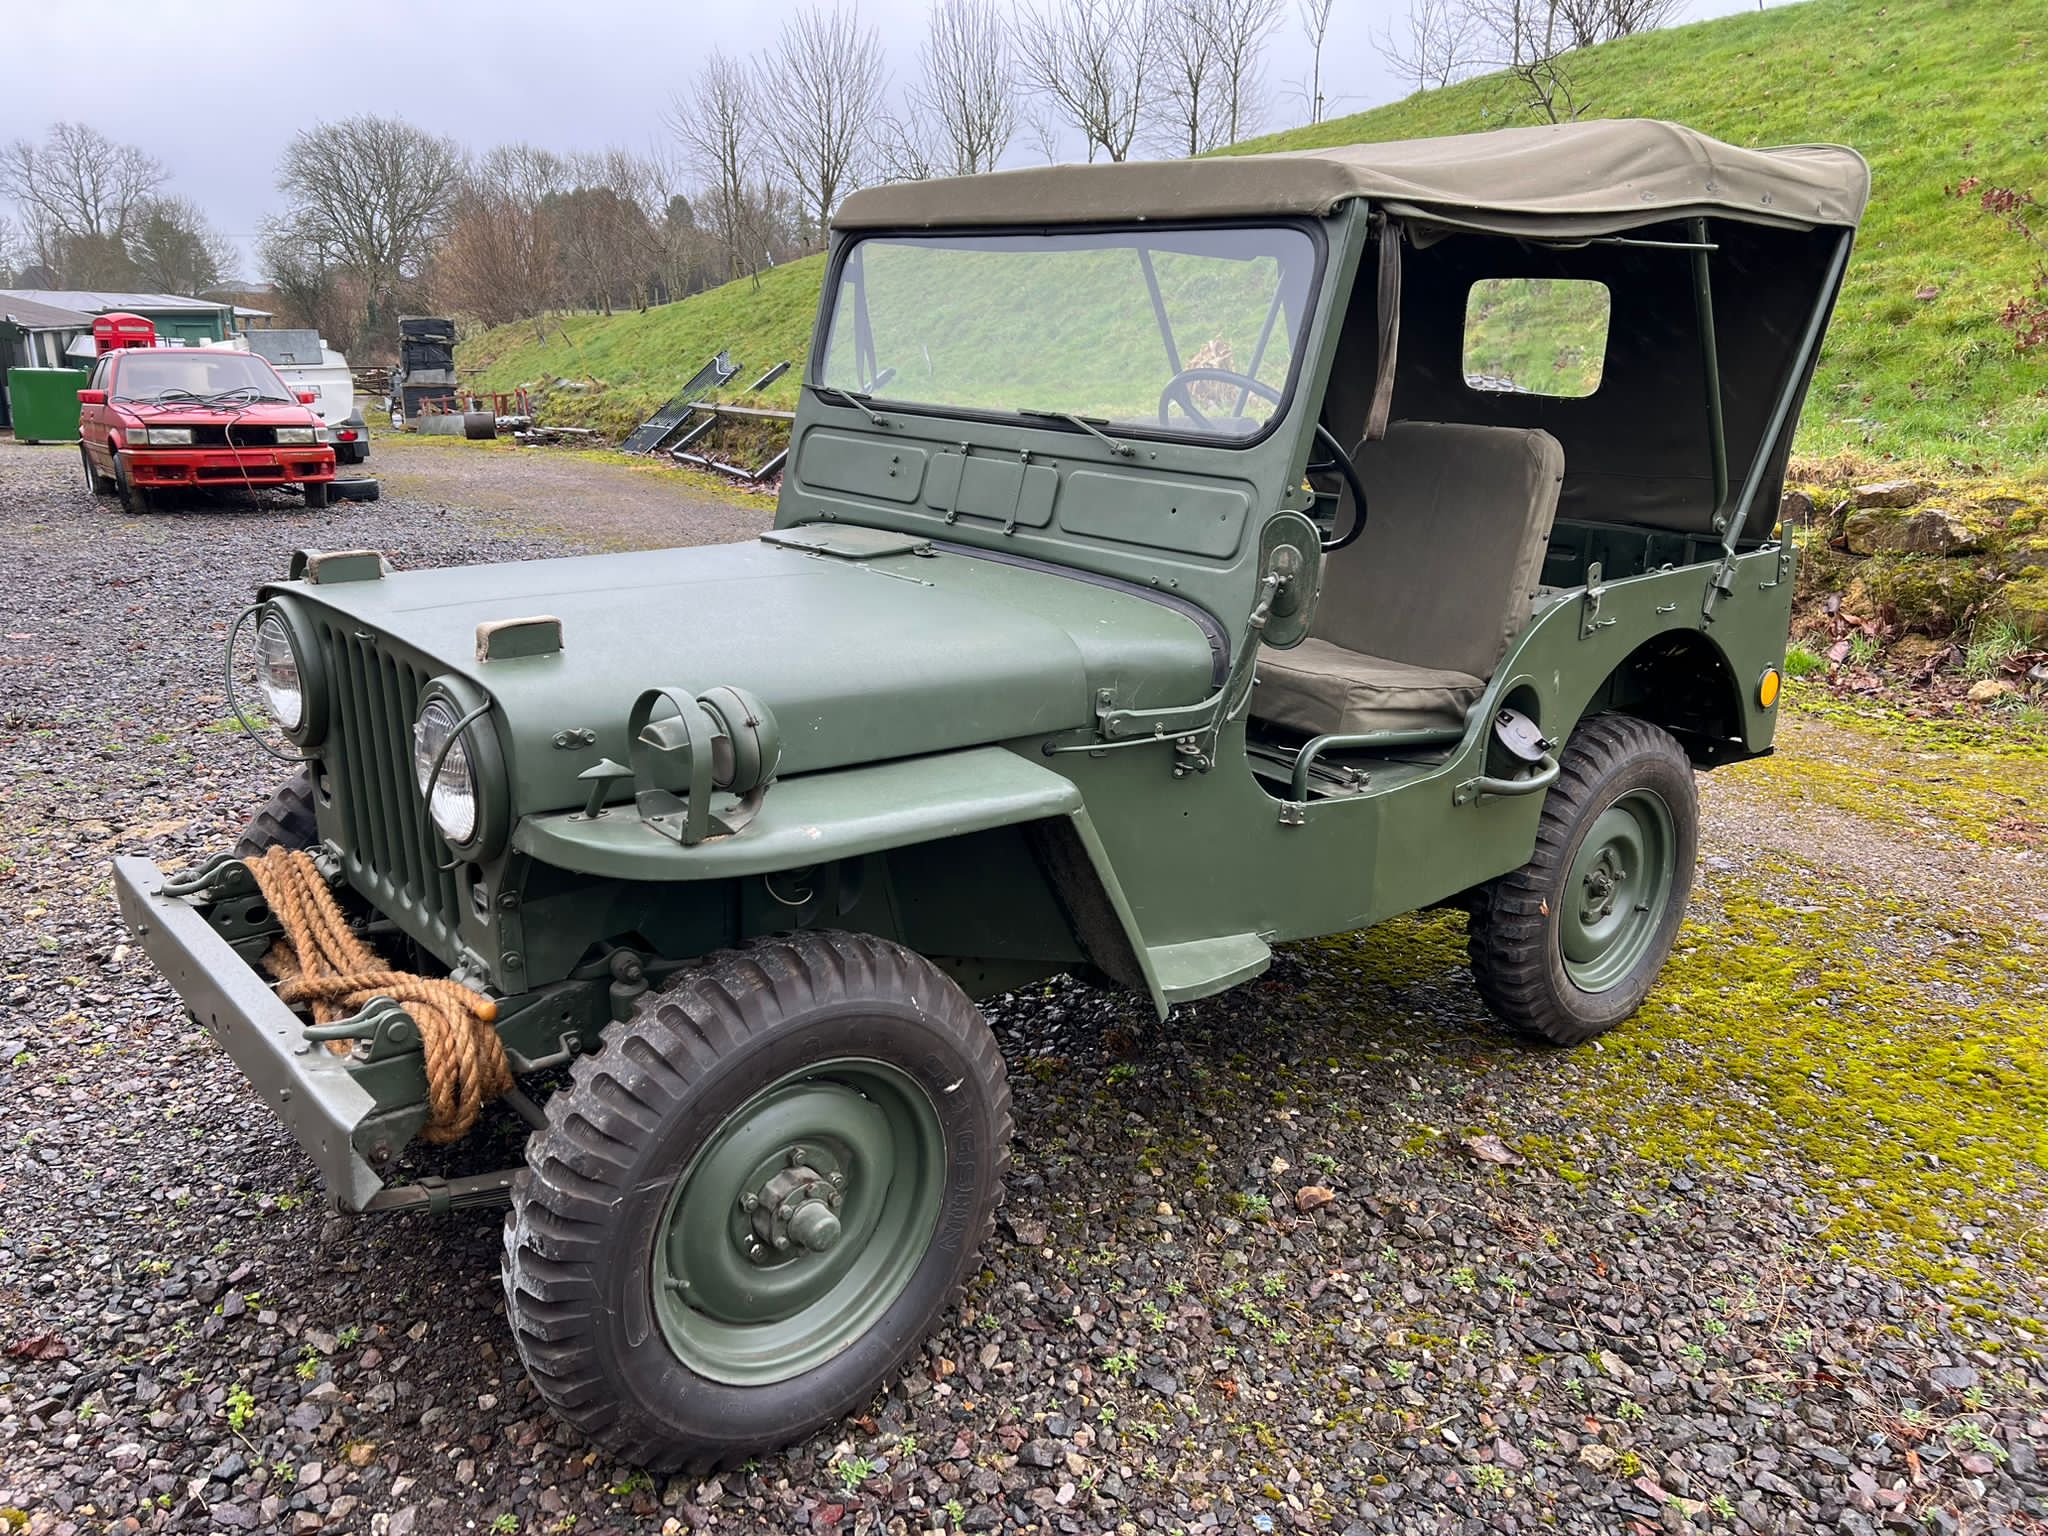 1945 Willys Jeep - Military Vehicle - Restored and raring to go... - Image 2 of 13